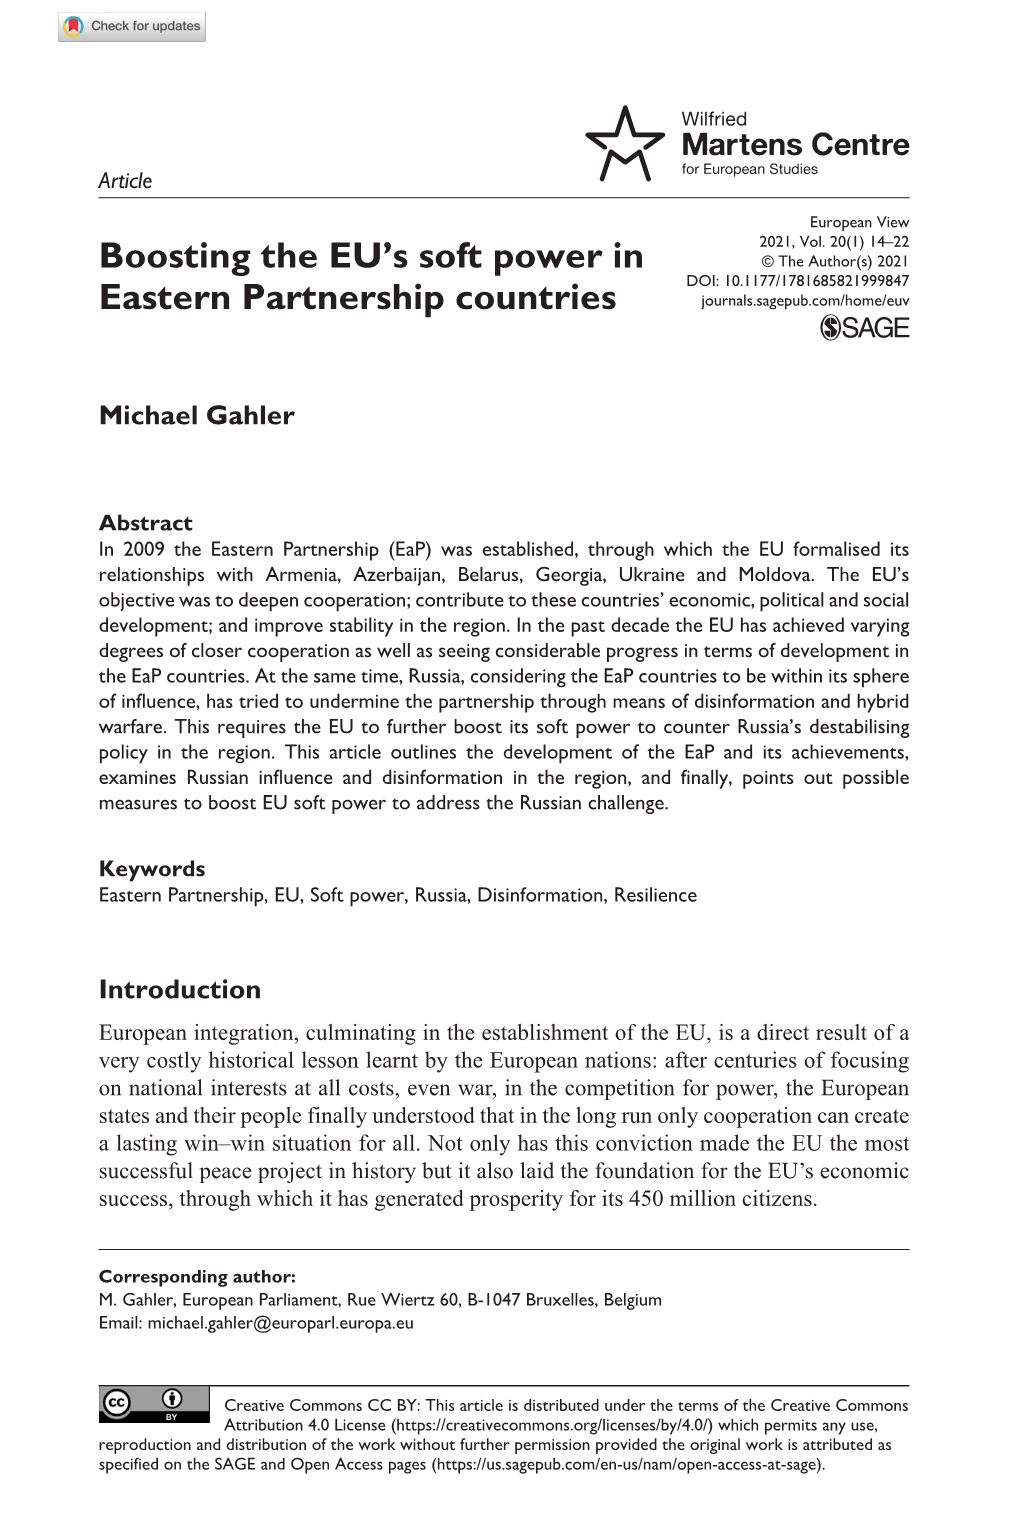 Boosting the EU's Soft Power in Eastern Partnership Countries